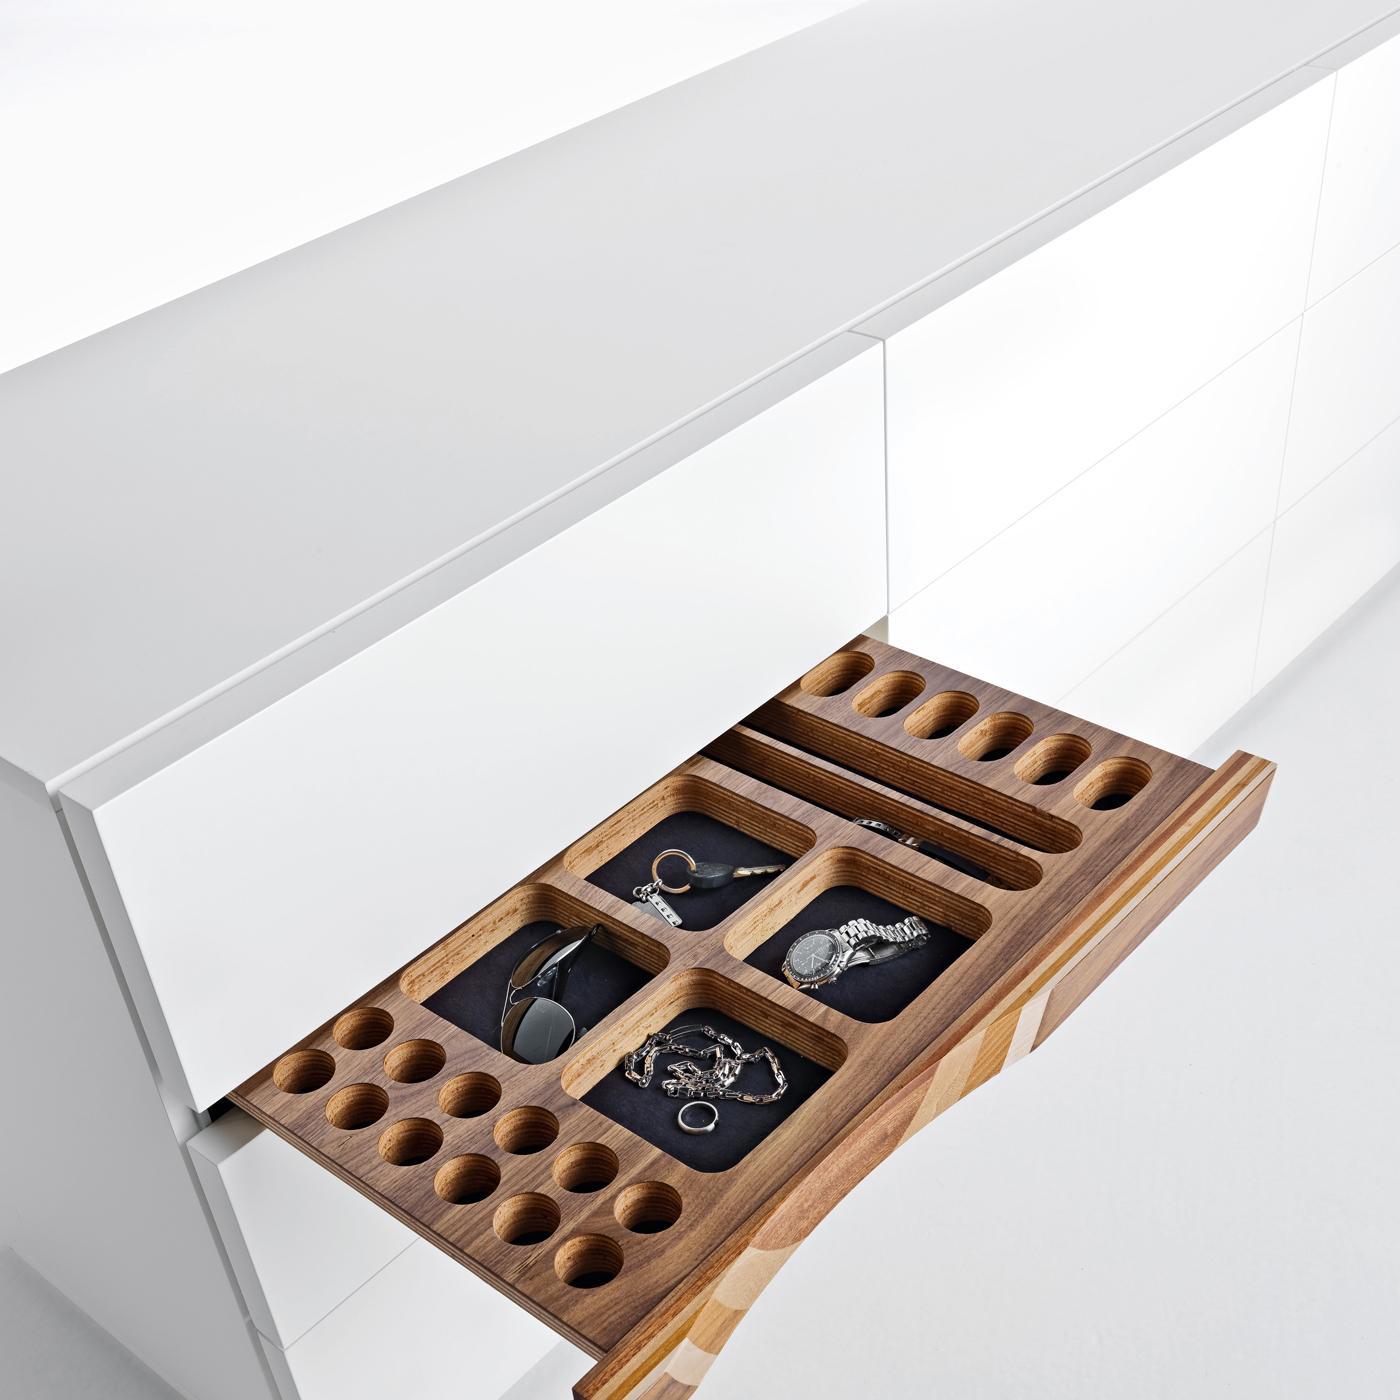 Simple yet elegant, this cupboard is enriched by a front insert recalling Toyo Ito’s famous Ripples Bench, combining walnut wood with oak, mahogany, ash, and cherry hiding a small jewelry drawer. The Minimalist design features a frame of